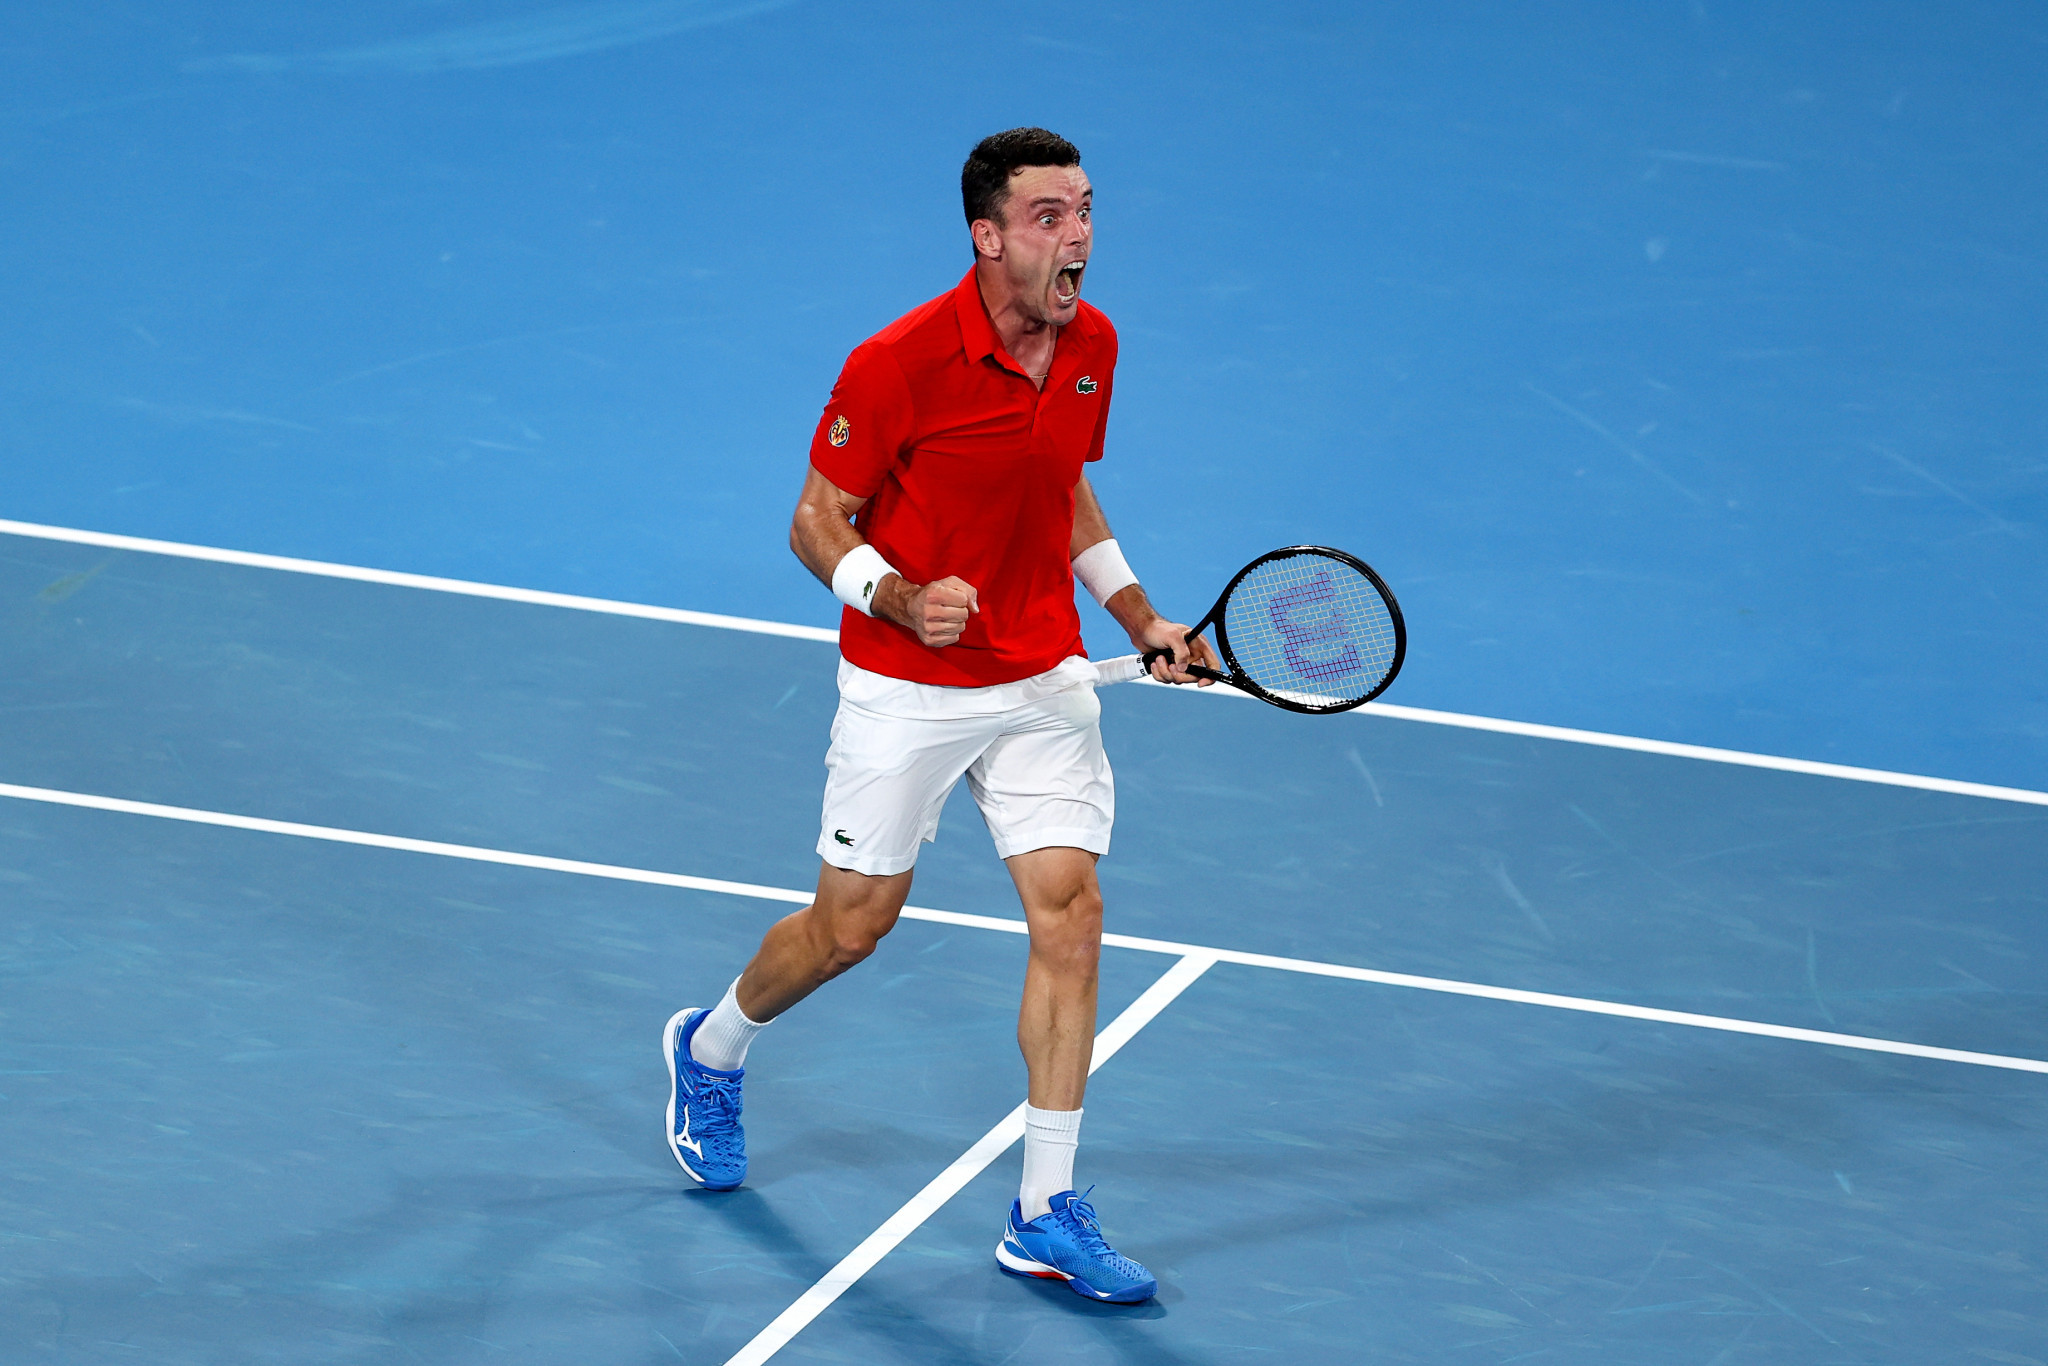 Roberto Bautista Agut beat Poland's Hubert Hurkacz to book Spain's place in the ATP Cup final ©Getty Images